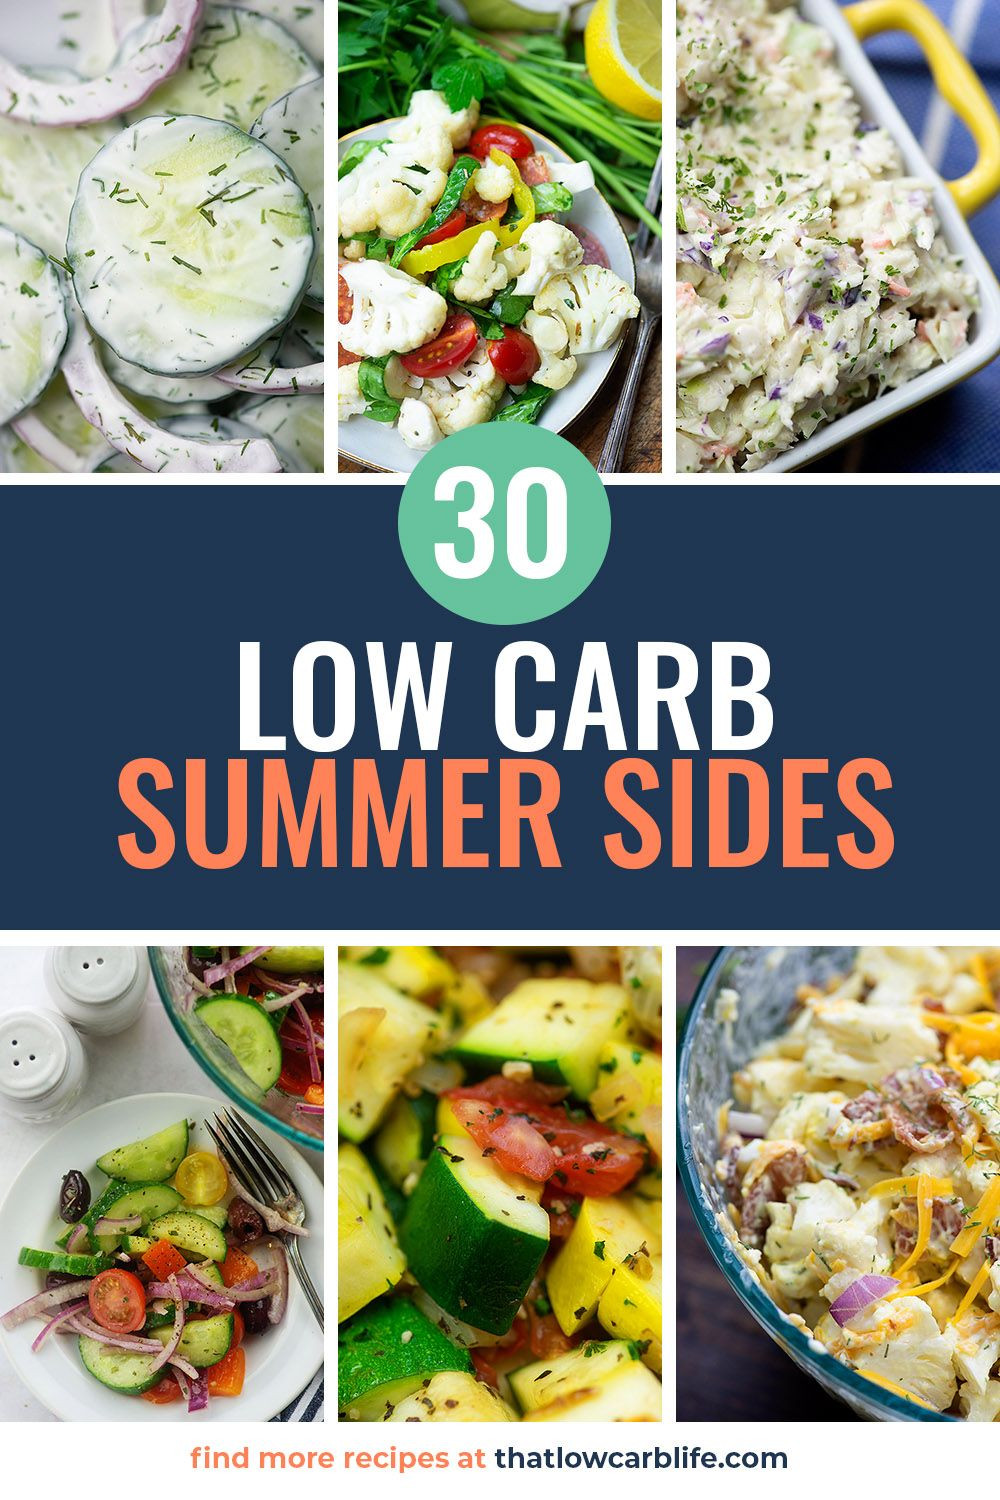 Summer Keto Side Dishes
 Keto Summer Side Dishes in 2020